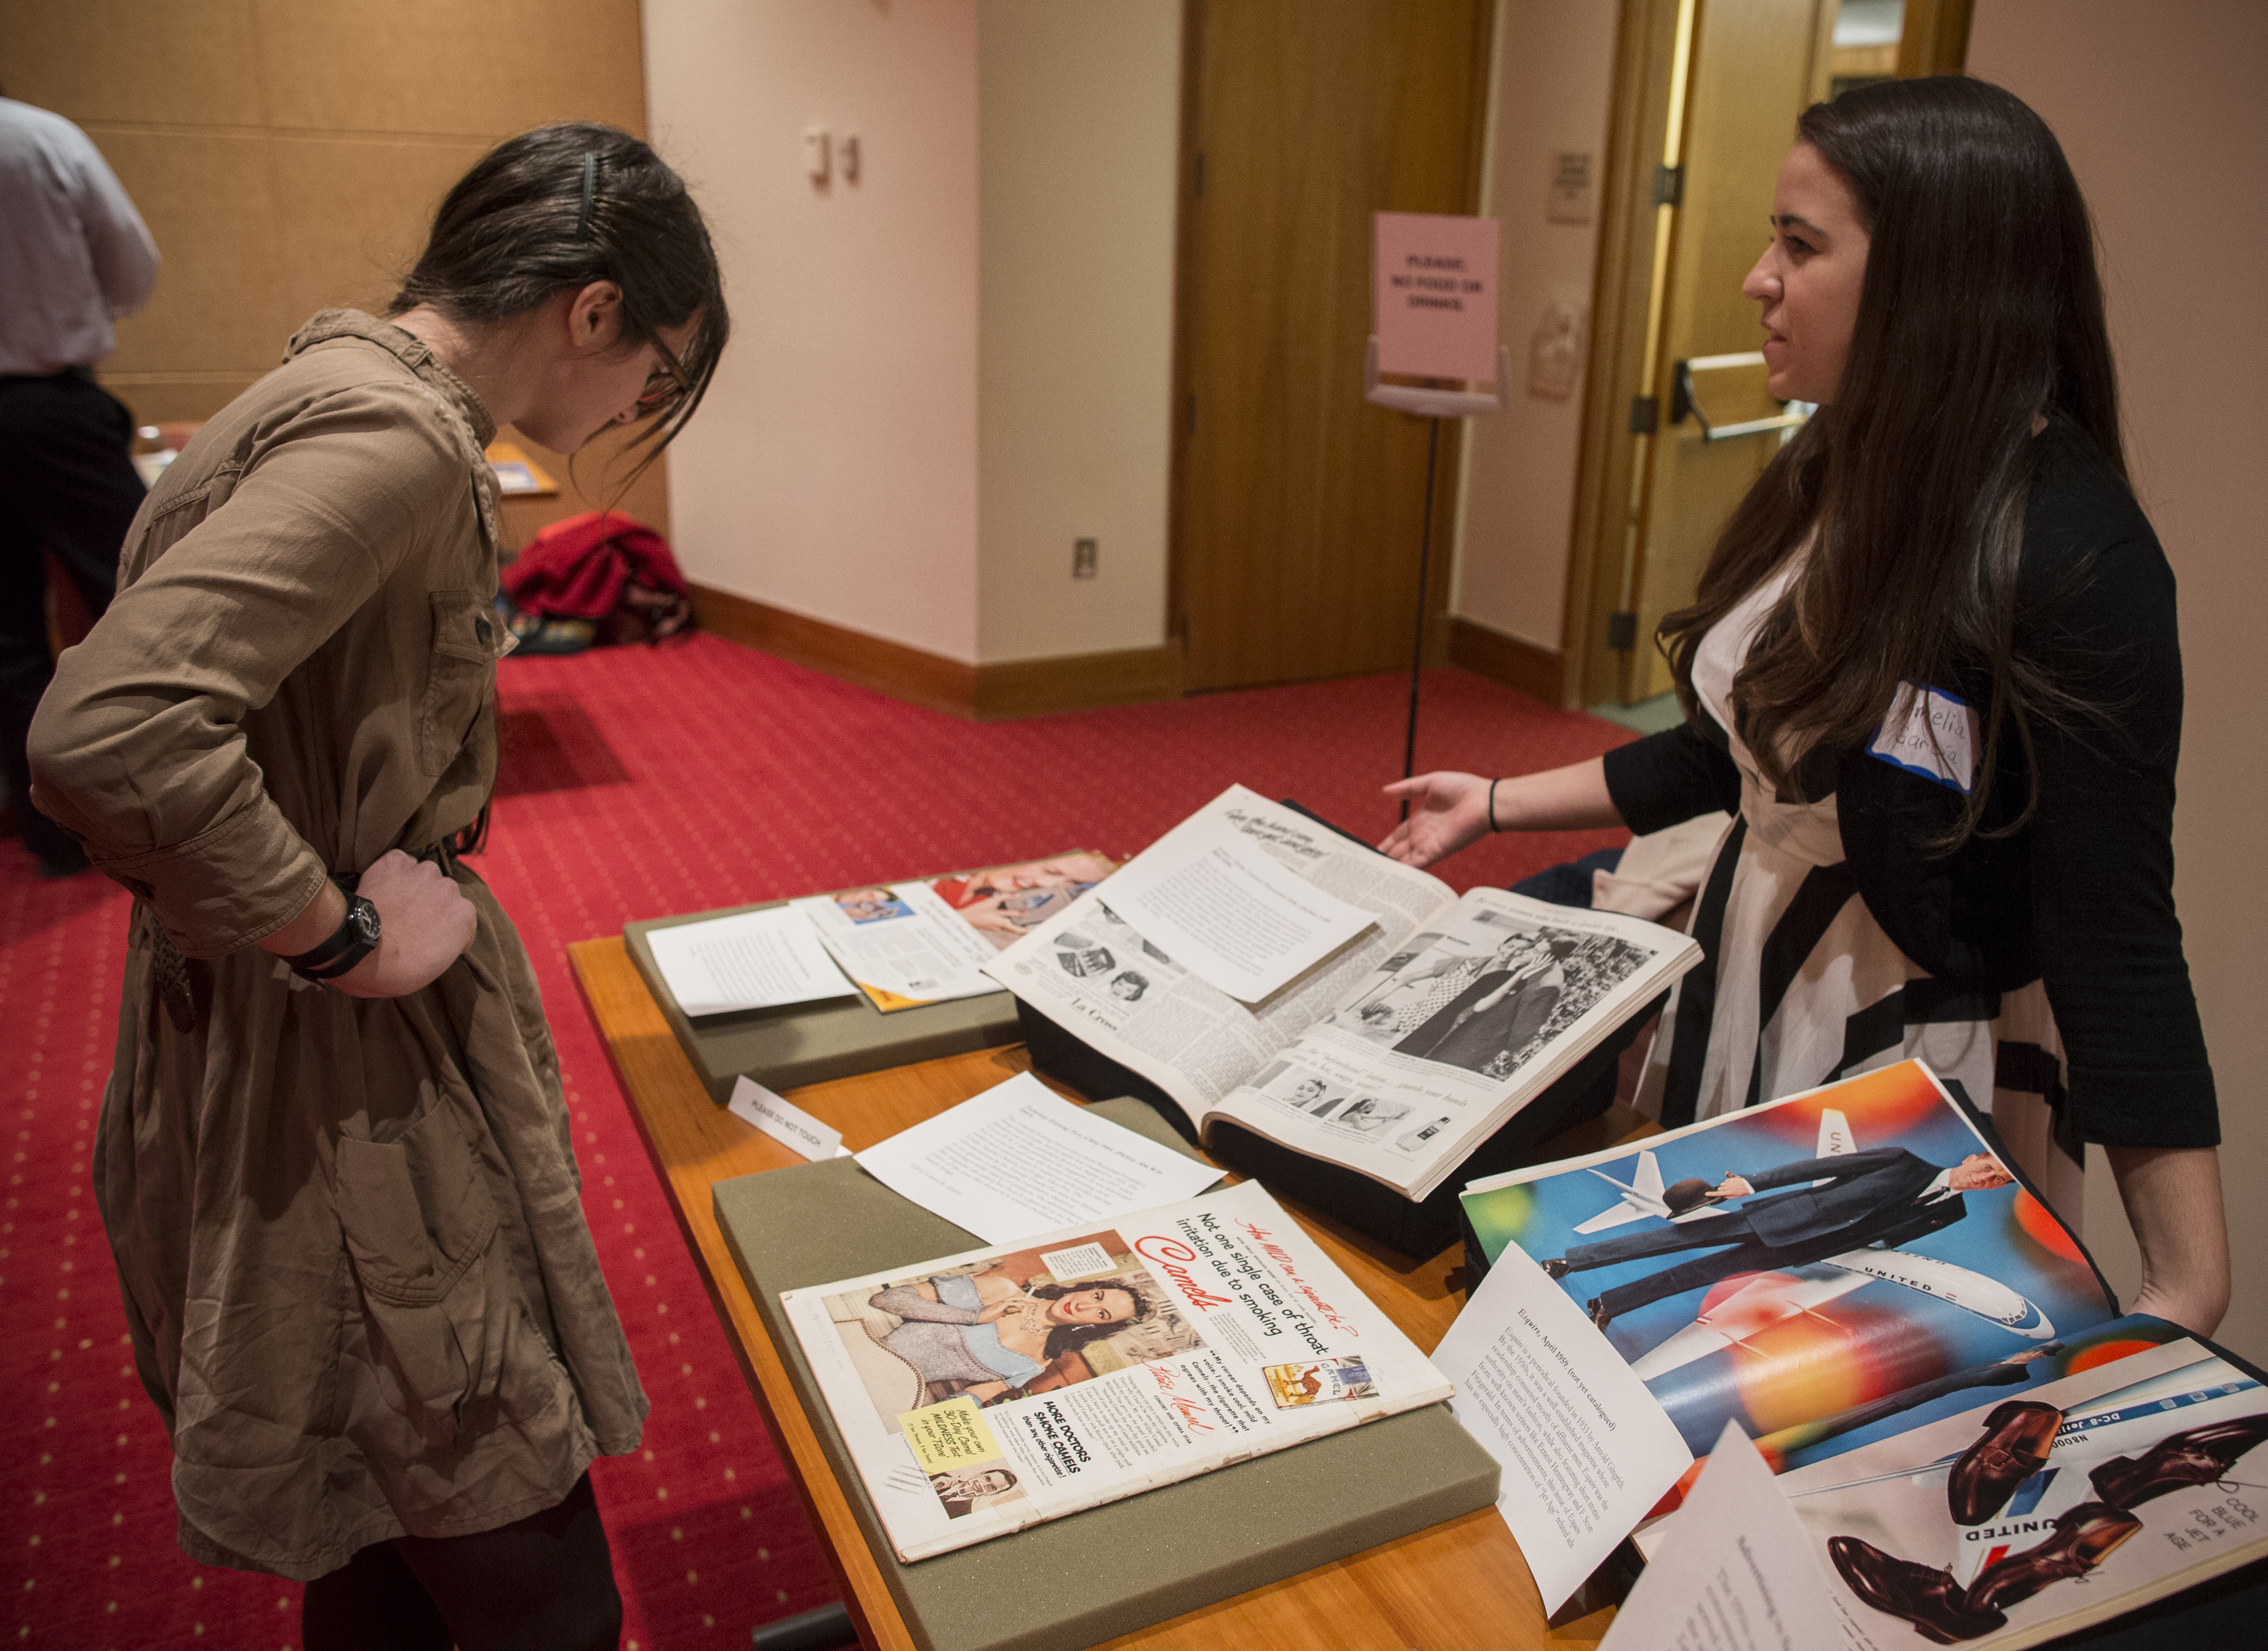 Amelia Garcia (right) talks to English graduate student and Special Collections employee about an advertisement from the 1950s, 19 November 2013. (Photograph by Sanjay Suchak)